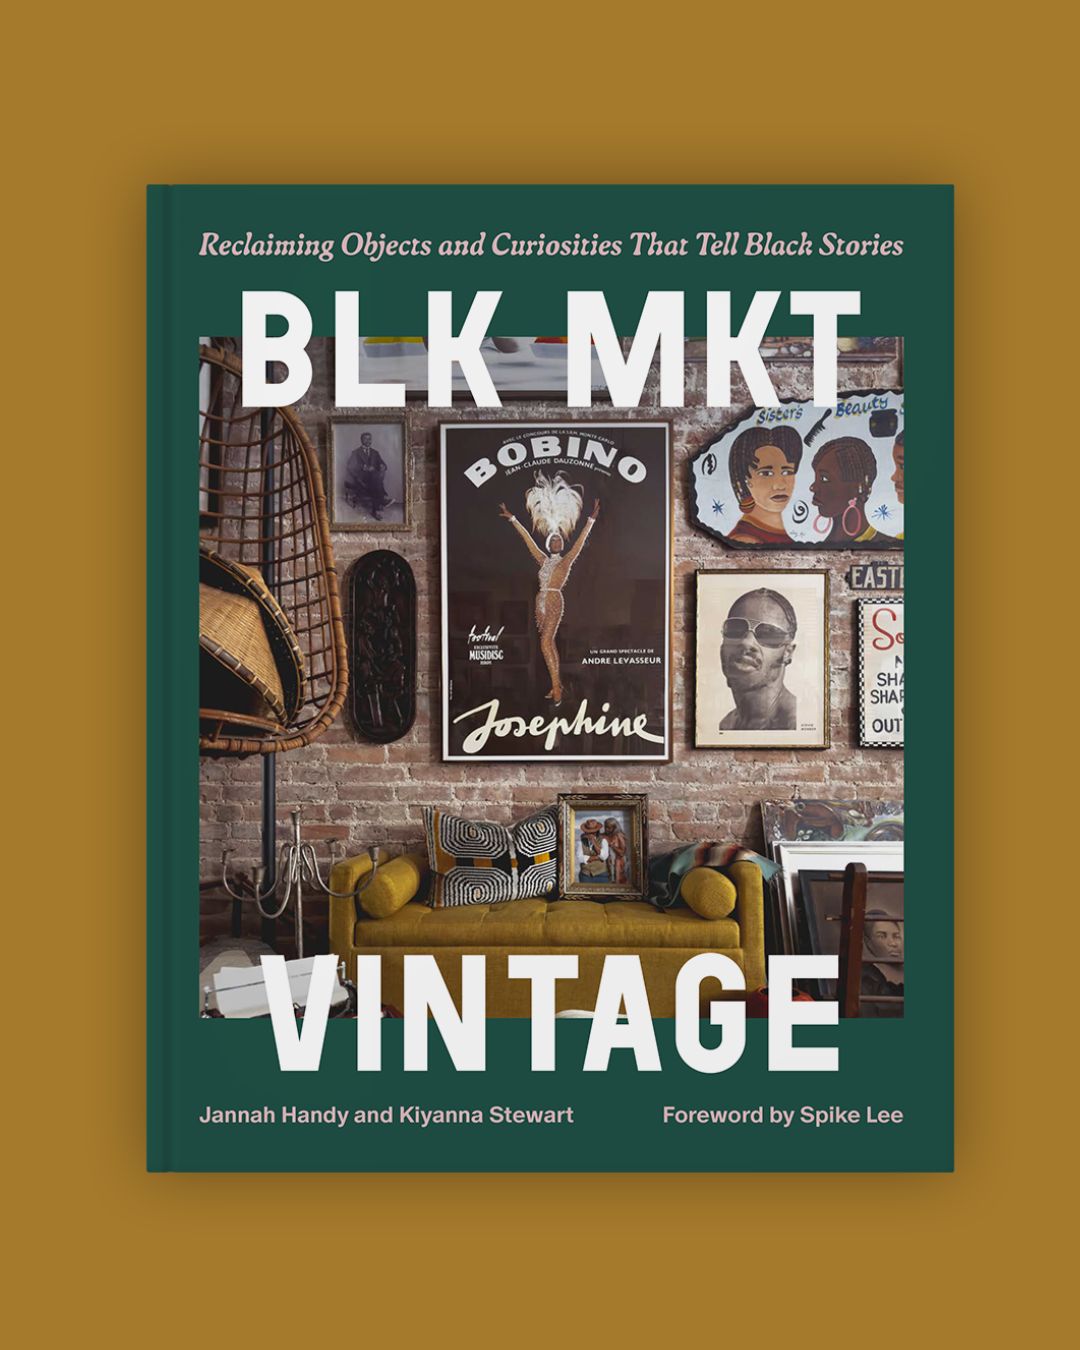 Pre-Order for &quot;BLK MKT Vintage: Reclaiming Objects and Curiosities That Tell Black Stories&quot;